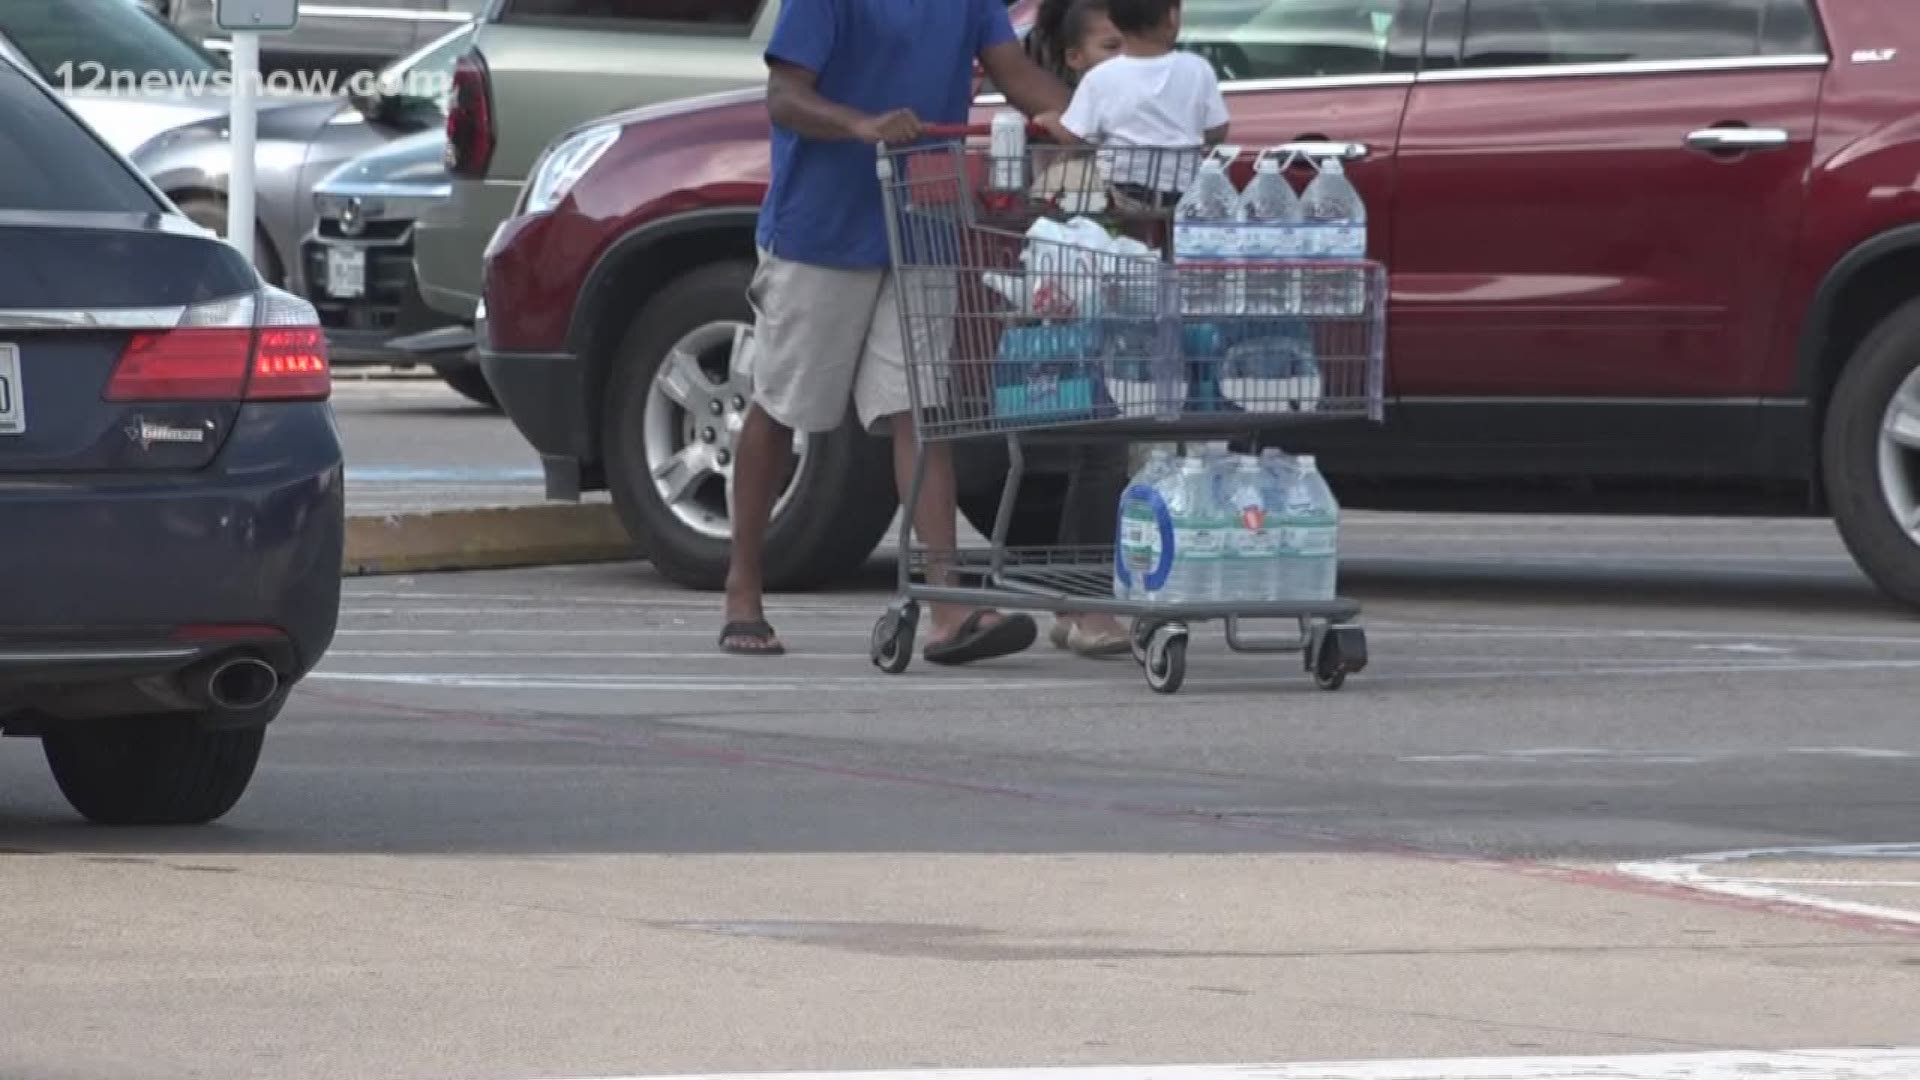 Shoppers were looking for water and essentials in several grocery stores on Wednesday.